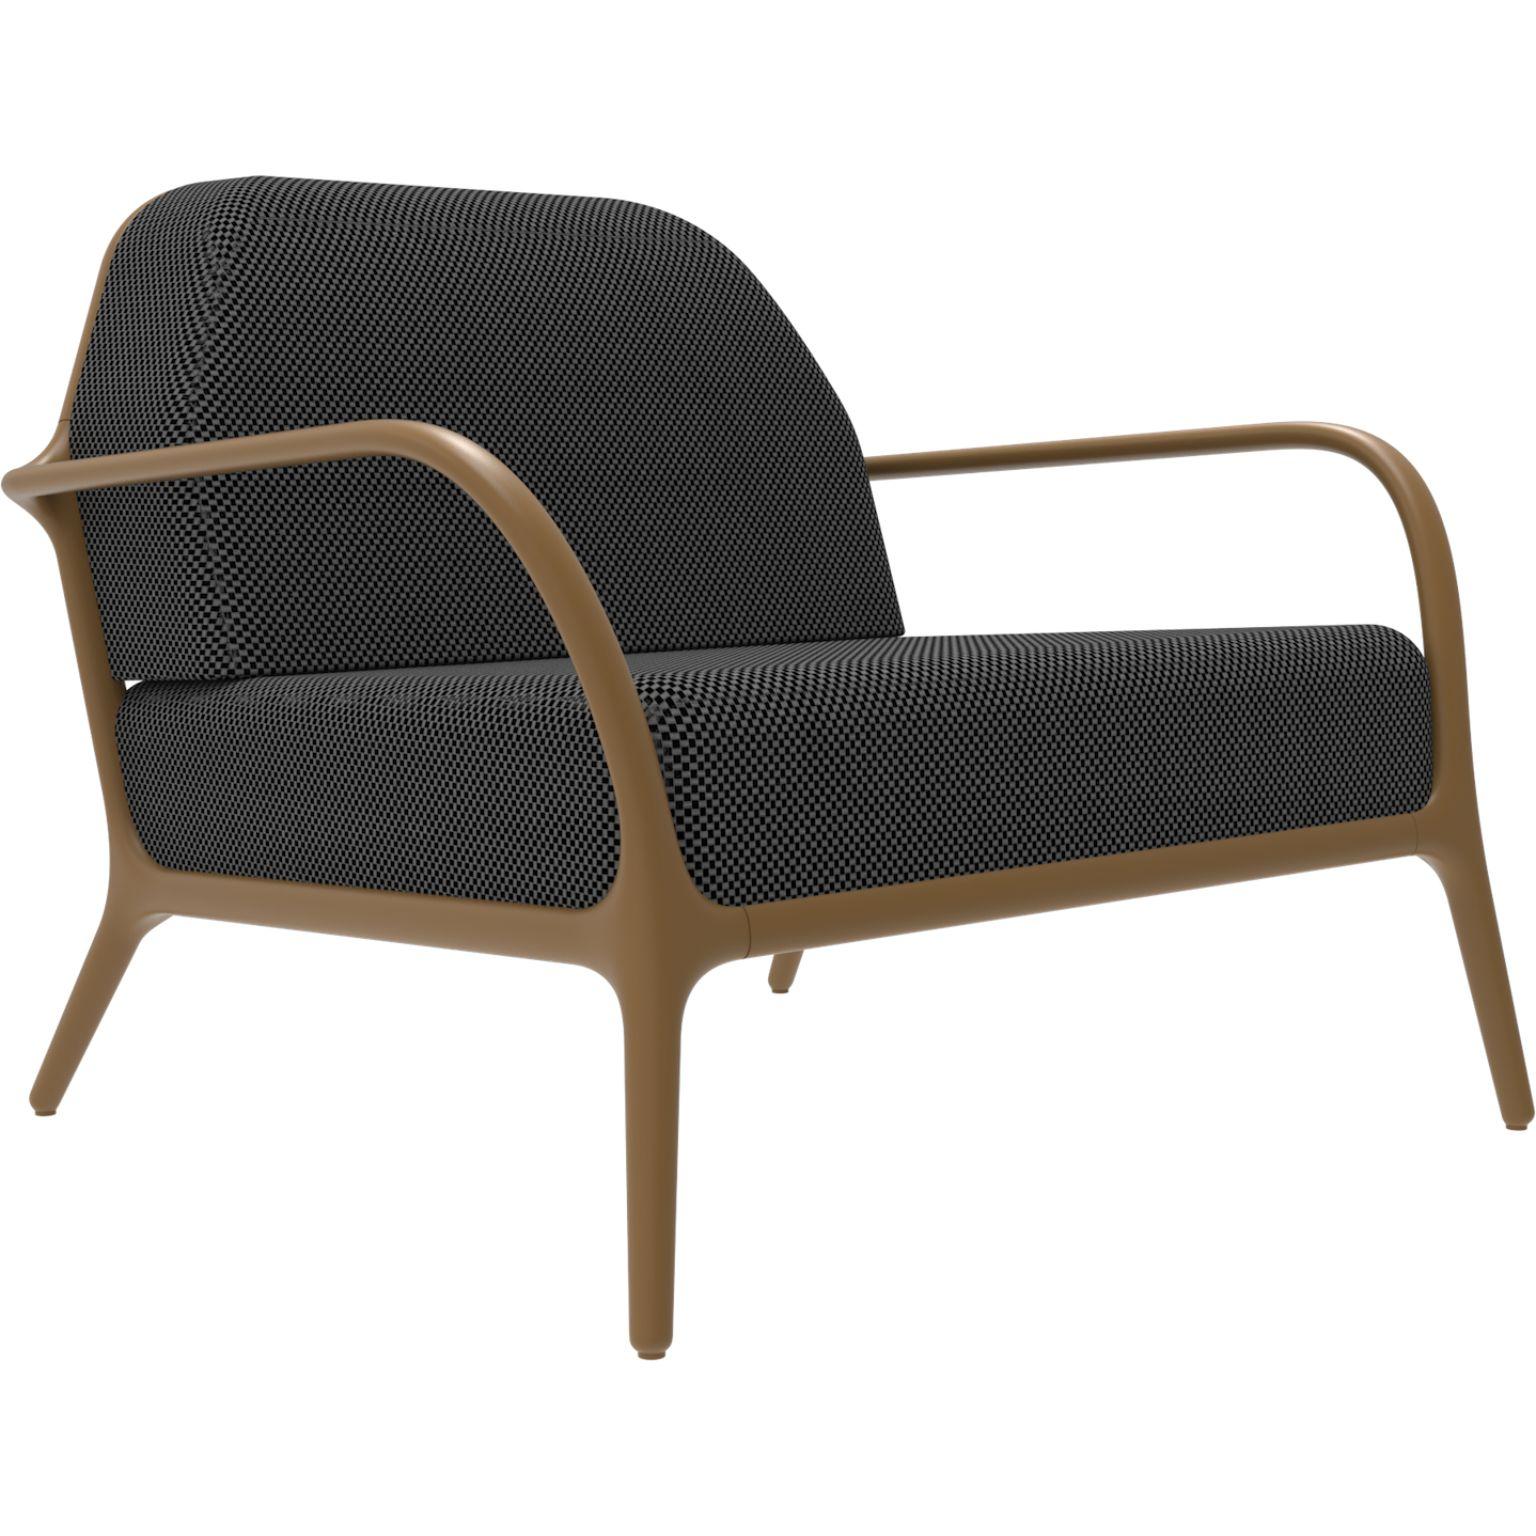 Xaloc Gold Amchair by MOWEE
Dimensions: D 100 x W 102 x H 81 cm (Seat Height 42 cm)
Material: Aluminum, Upholstery
Weight: 29 kg
Also available in different colours and finishes. Please contact us.

 Xaloc synthesizes the lines of interior